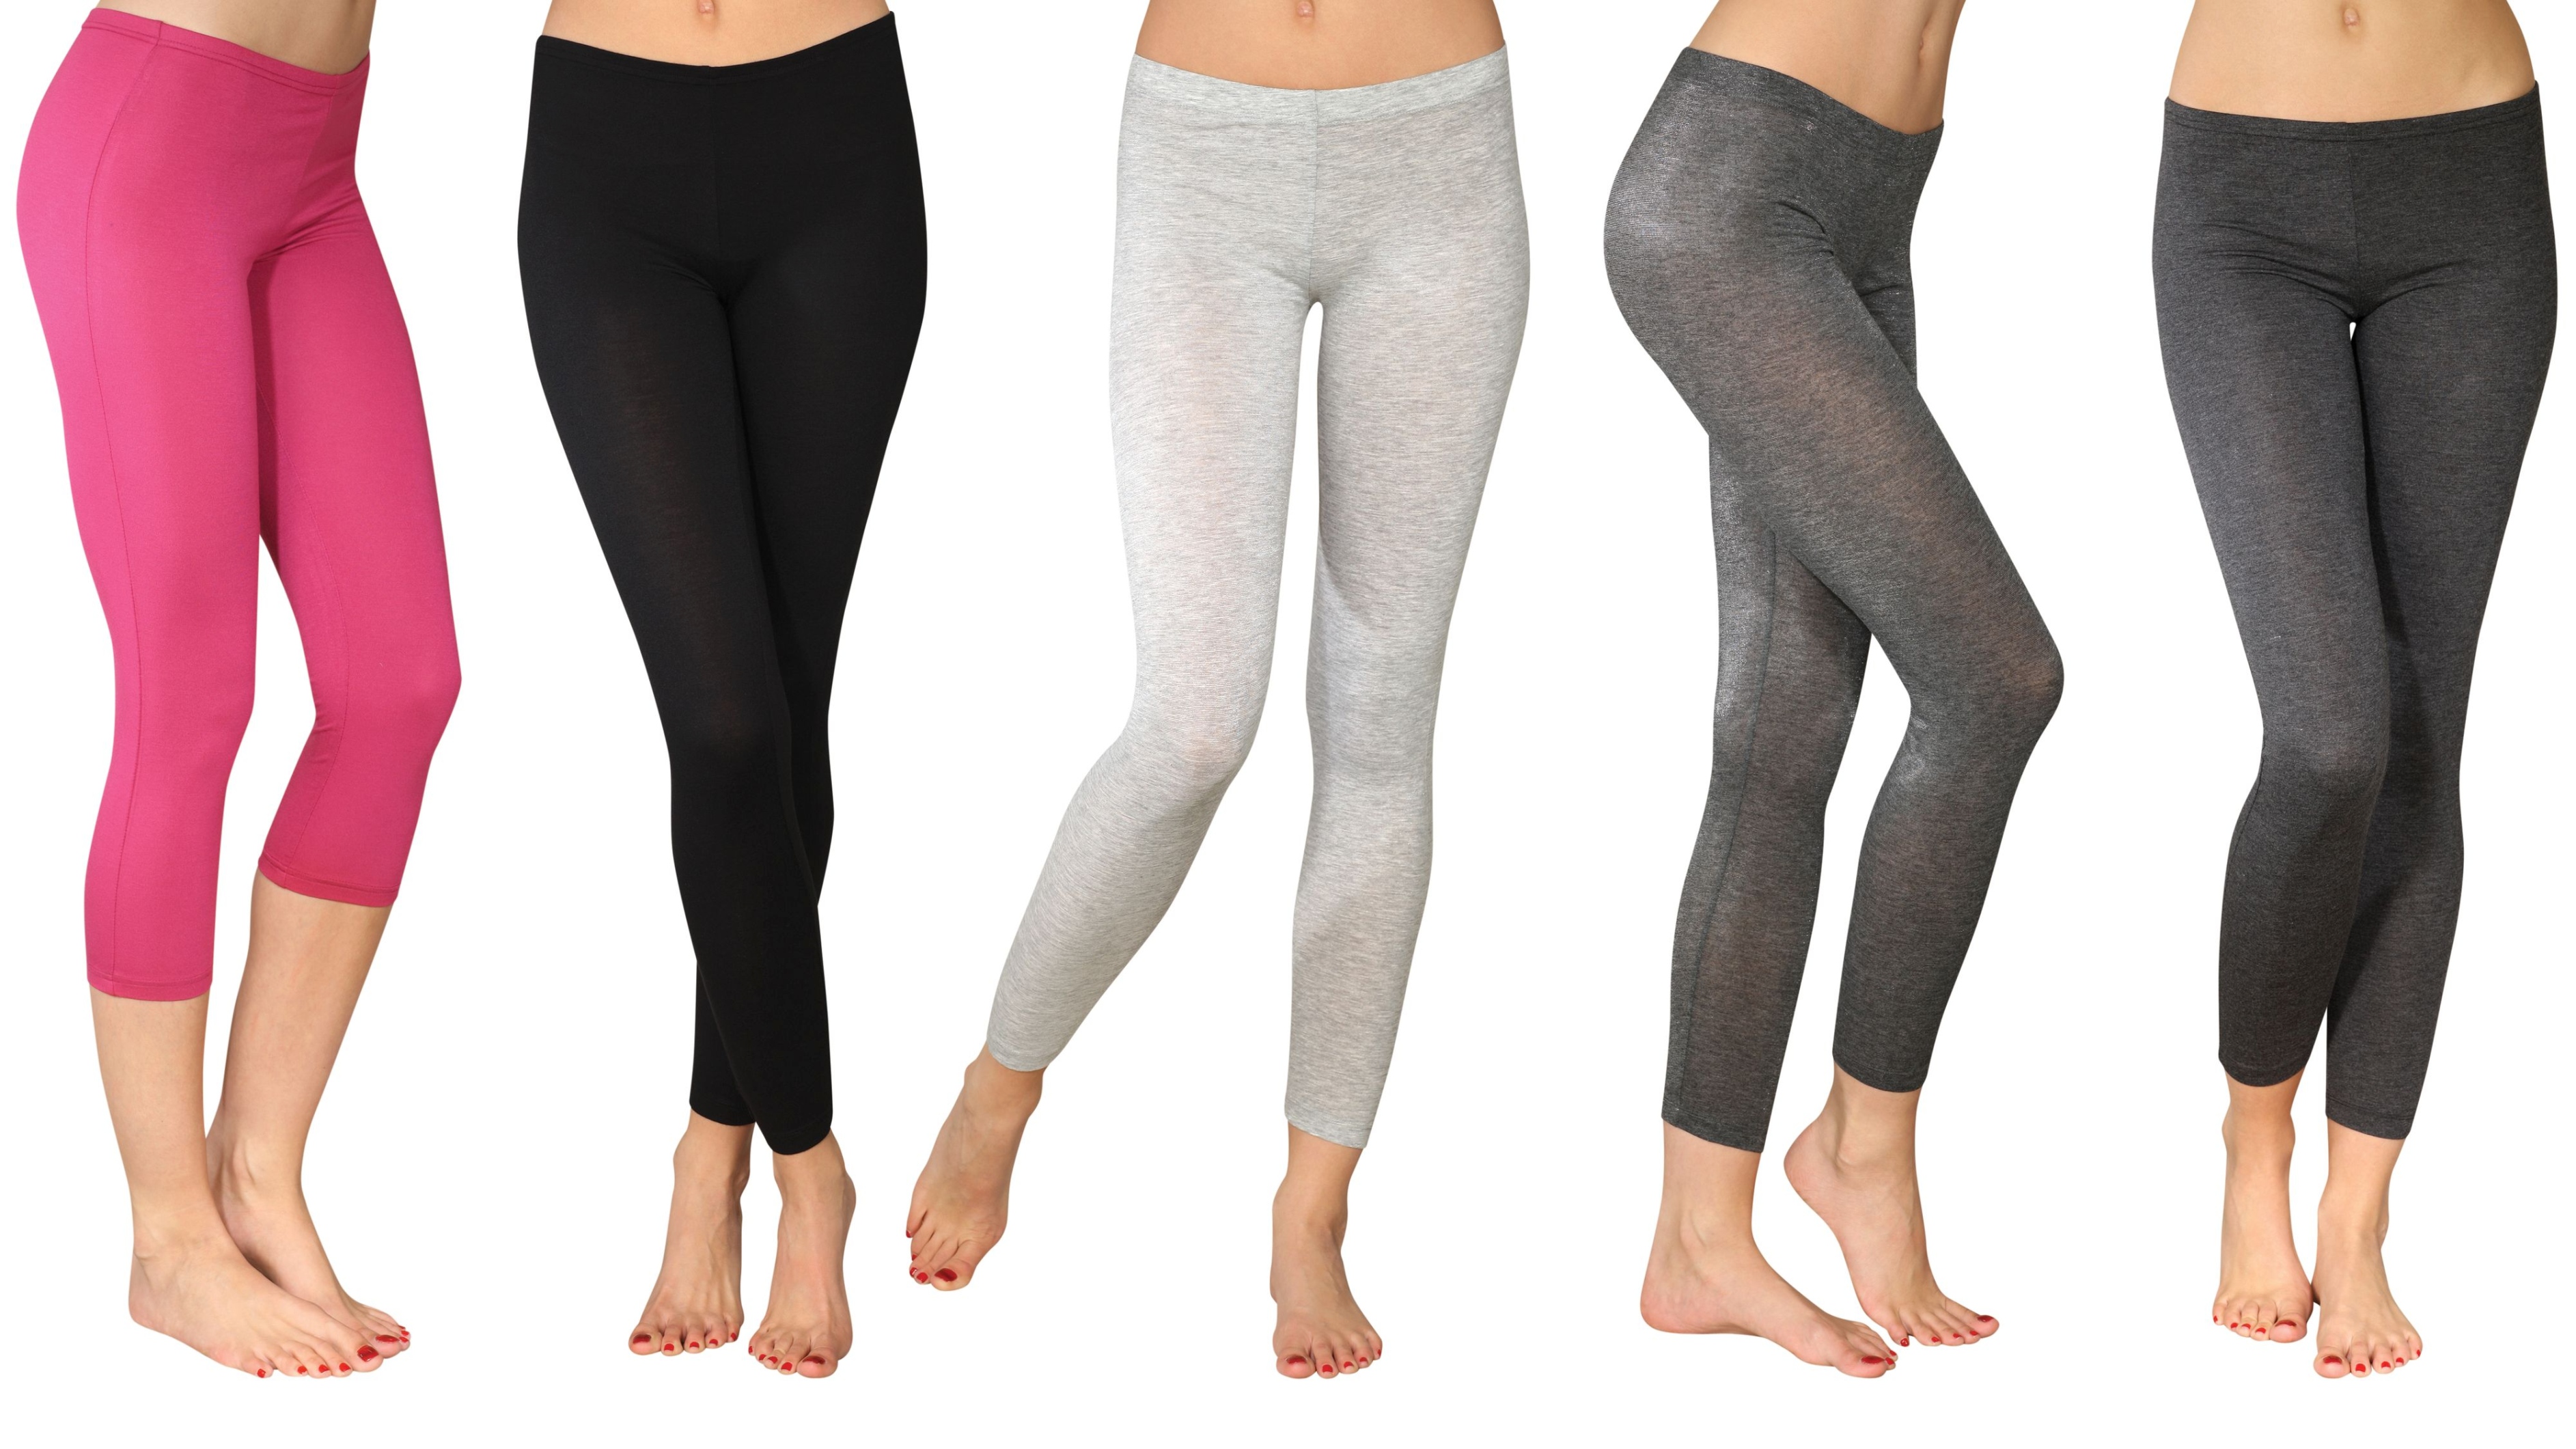 Leggings row: It's about women, their bodies and the discomfort of